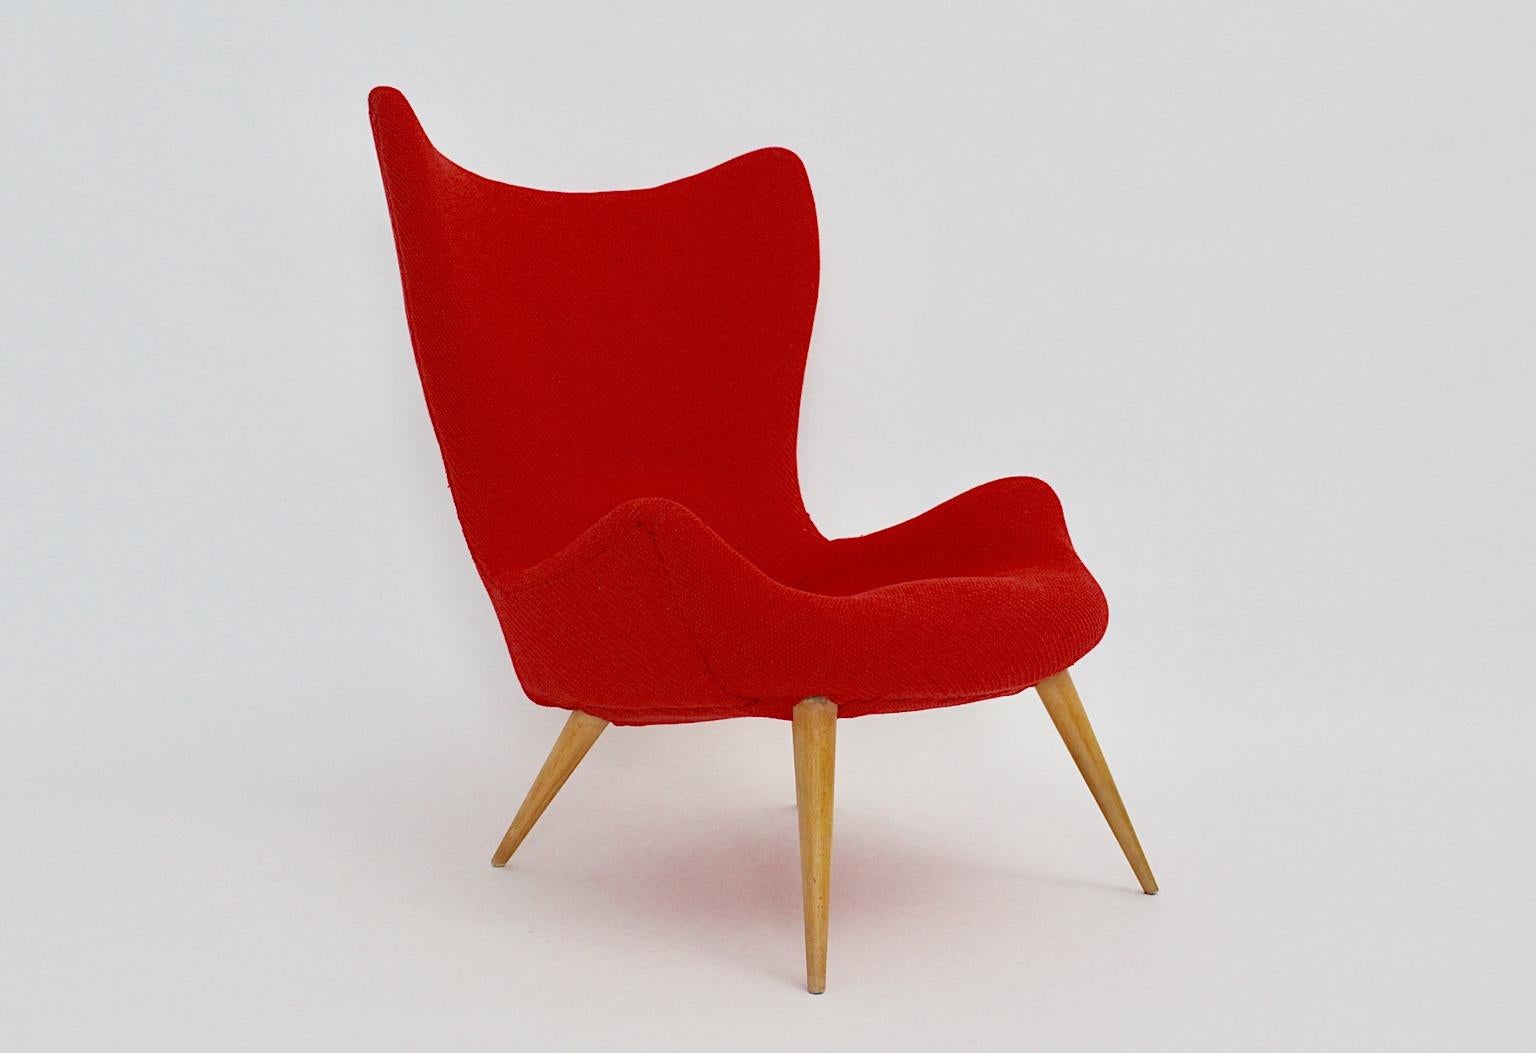 Mid Century Modern vintage lounge chair or club chair from beech and red woolen fabric 1950s.
A stunning lounge chair with four ( 4 ) beech wooden feet and a new cover from cherry red textile fabric by Kvadrat from the 1950s.
This club chair or